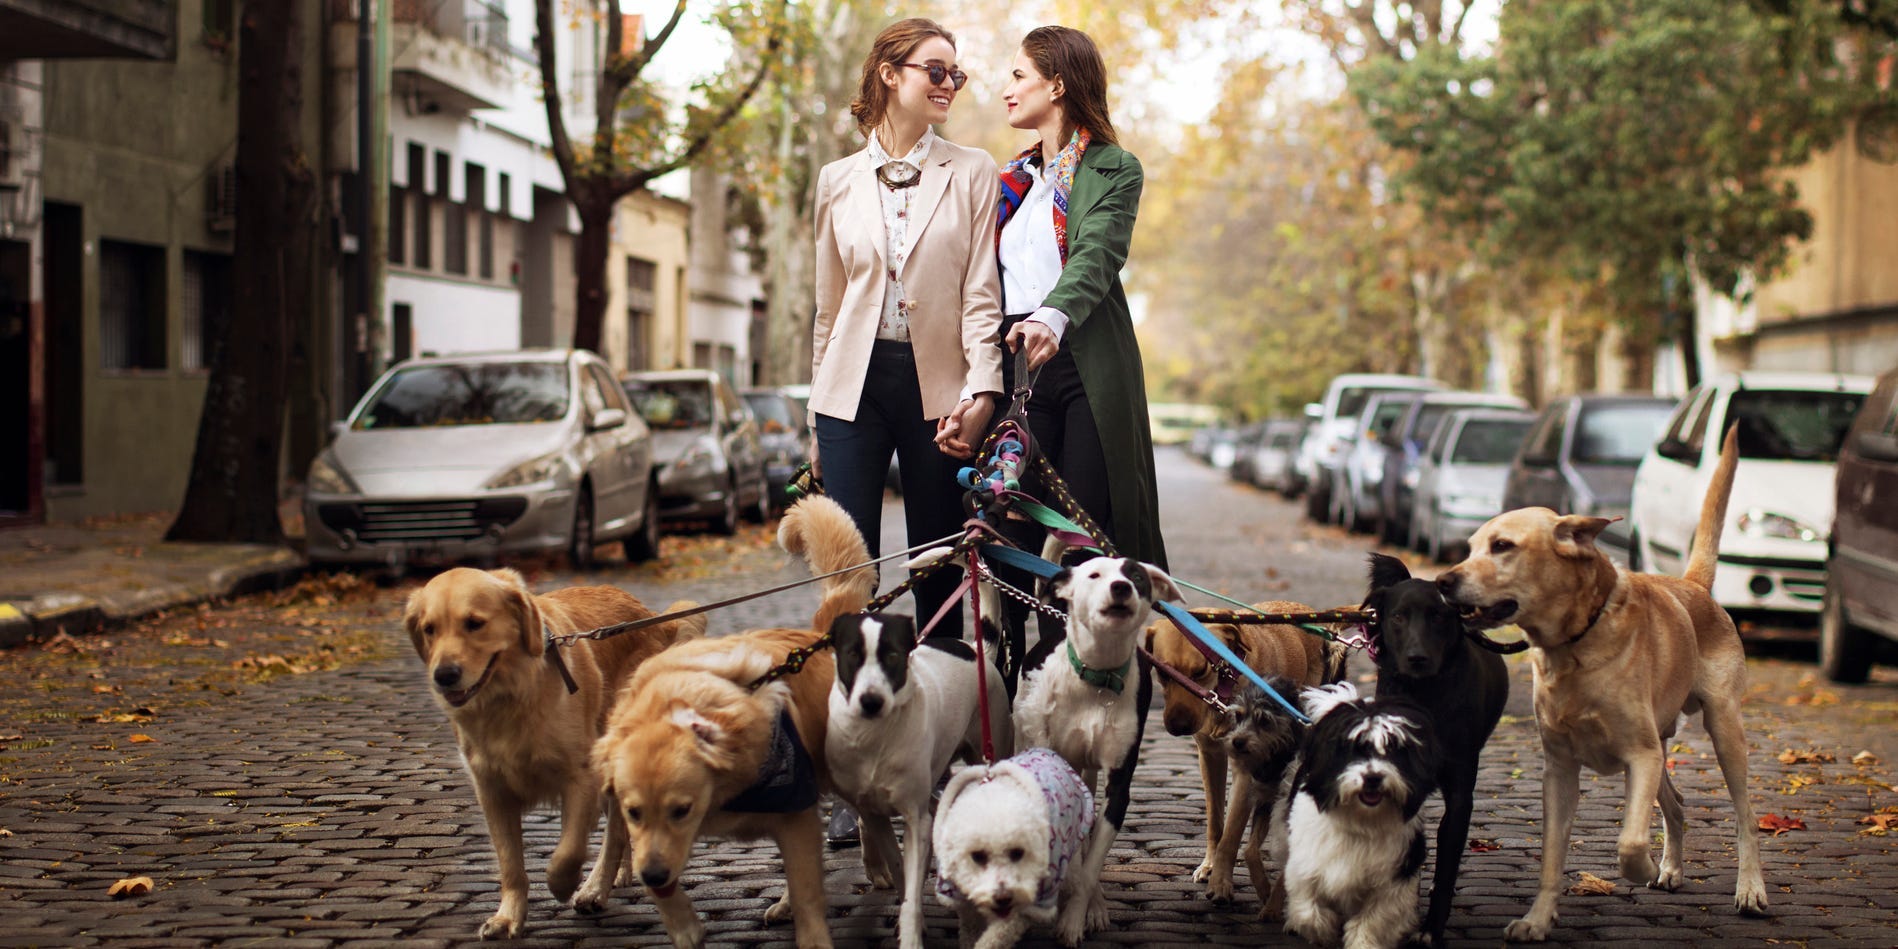 Two women walk nine dogs and look at each other lovingly.